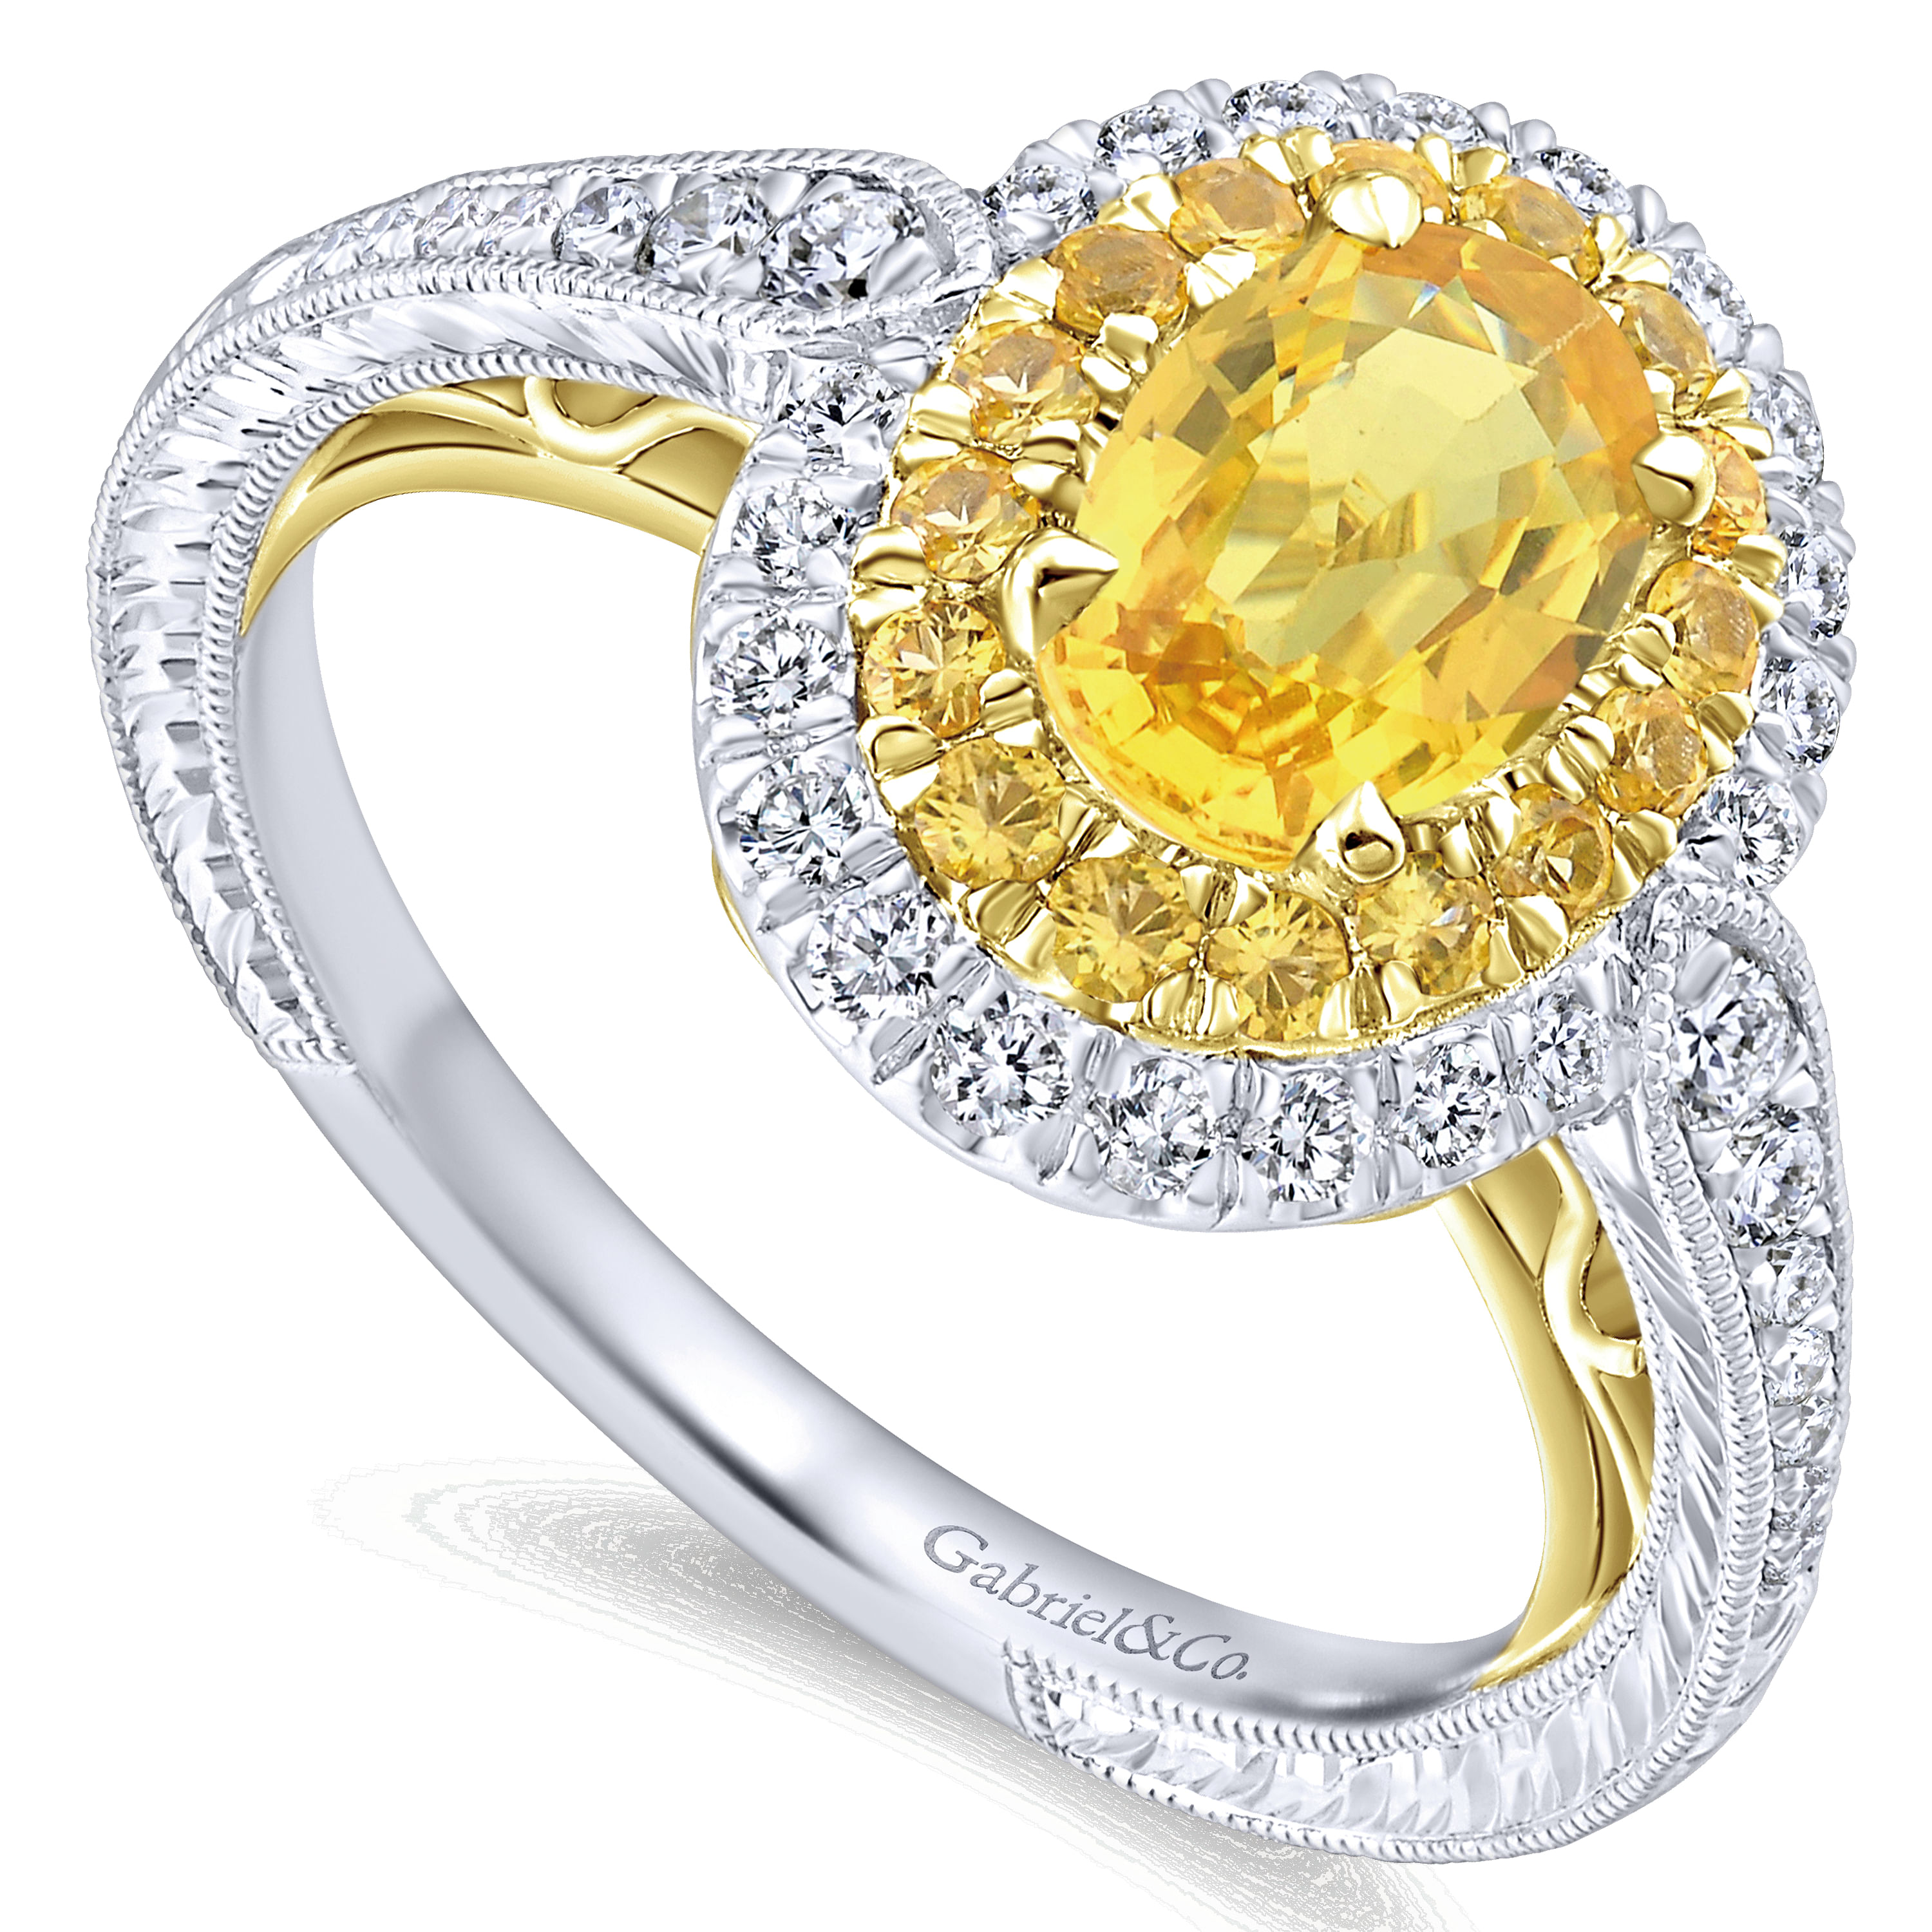 14K White-Yellow Gold Oval Double Halo Diamond and Yellow Sapphire Engagement Ring